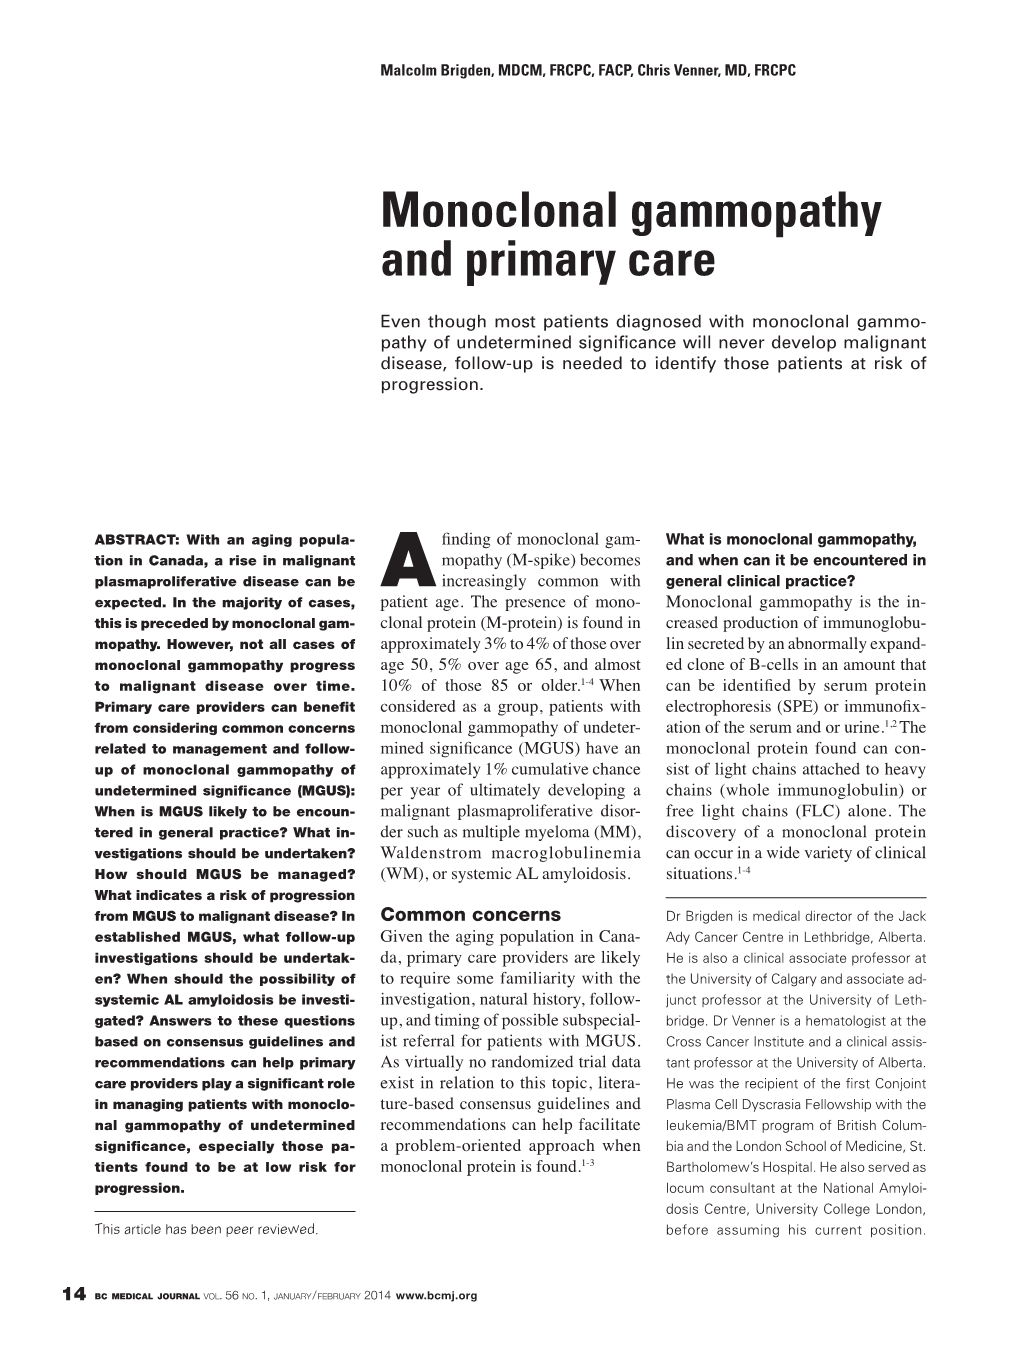 Monoclonal Gammopathy and Primary Care